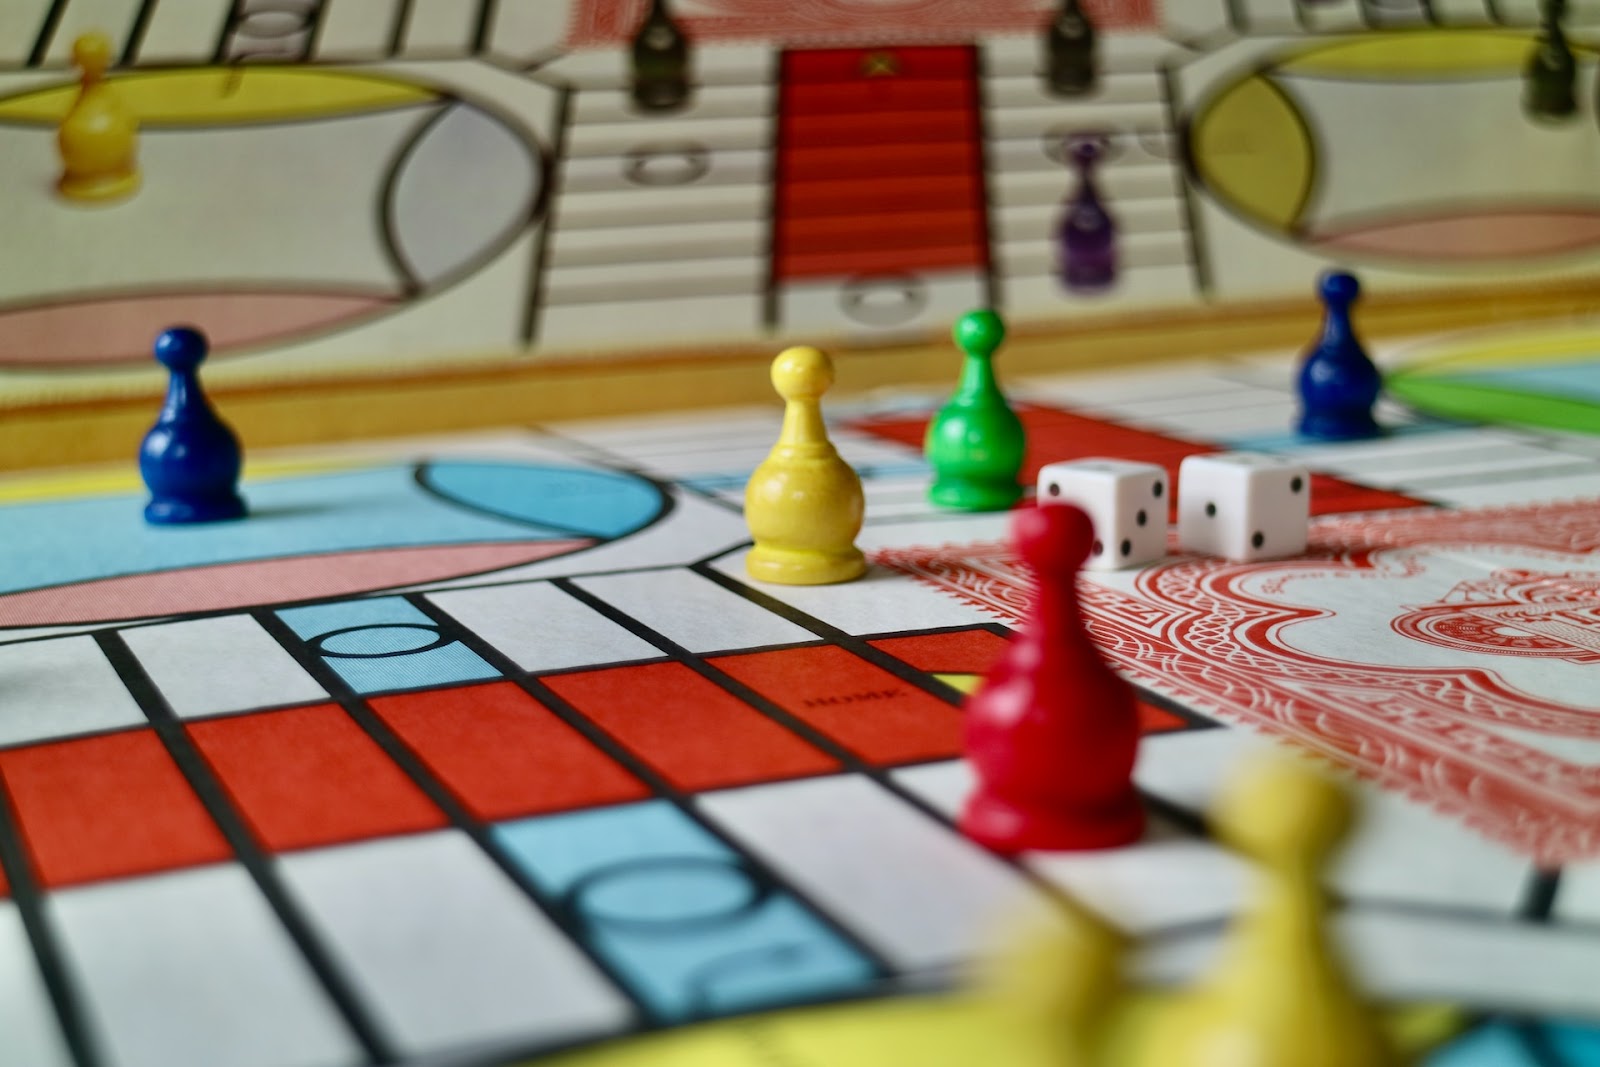 Board games make perfect Valentine's Day gifts for date nights and game nights.

Photo by <a href="https://unsplash.com/@goodfindsvolusia?utm_content=creditCopyText&utm_medium=referral&utm_source=unsplash">Nik Korba</a> on <a href="https://unsplash.com/photos/yellow-red-and-green-plastic-toy-3WceTBlUoMs?utm_content=creditCopyText&utm_medium=referral&utm_source=unsplash">Unsplash</a>
  